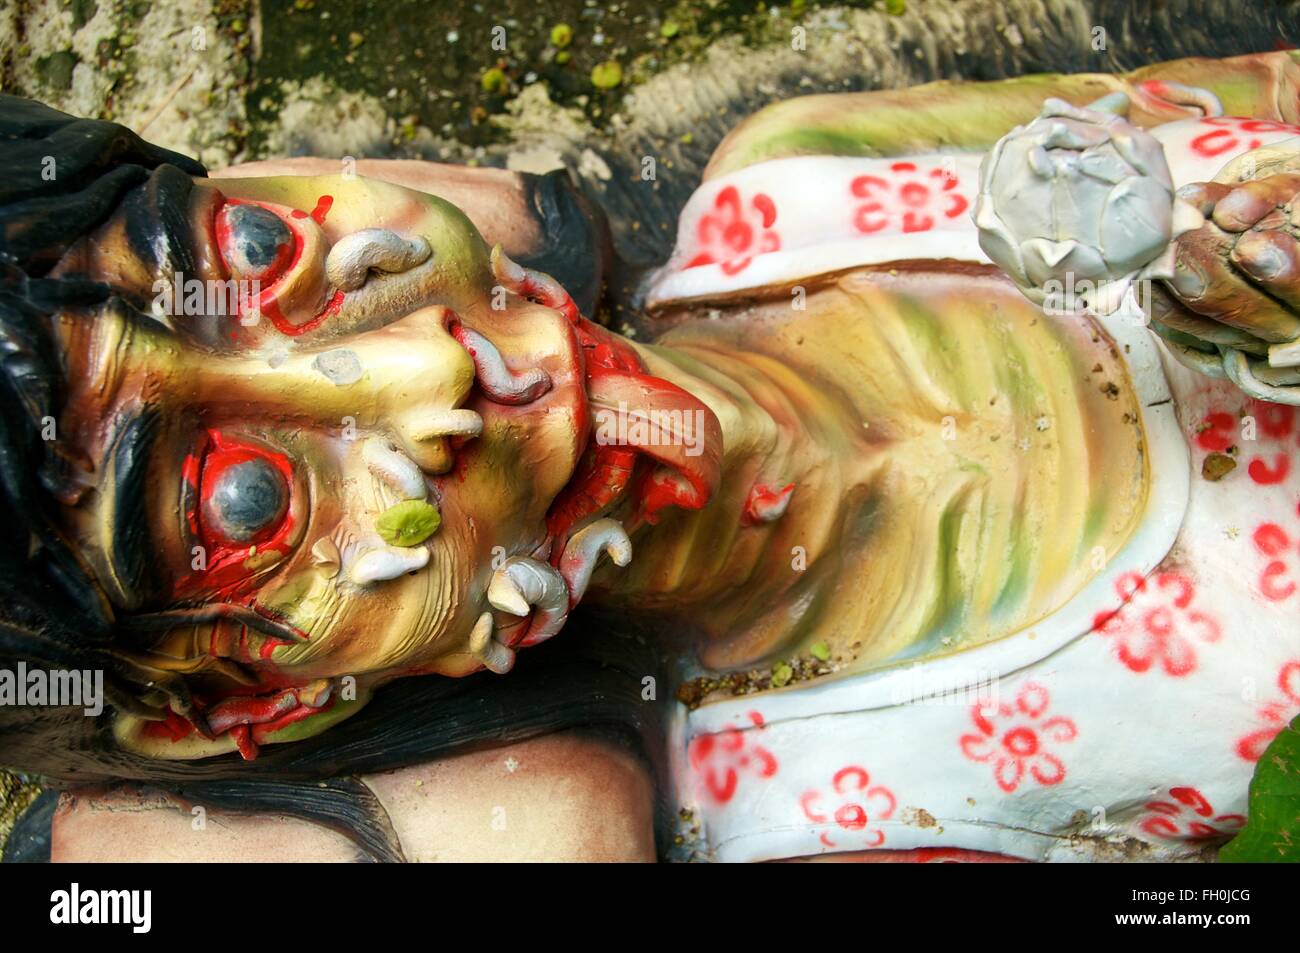 Sculpture of decaying body in Buddhist Garden of Hell, Wat Mae Kaet Noi, near Chiang Mai, Thailand. Stock Photo